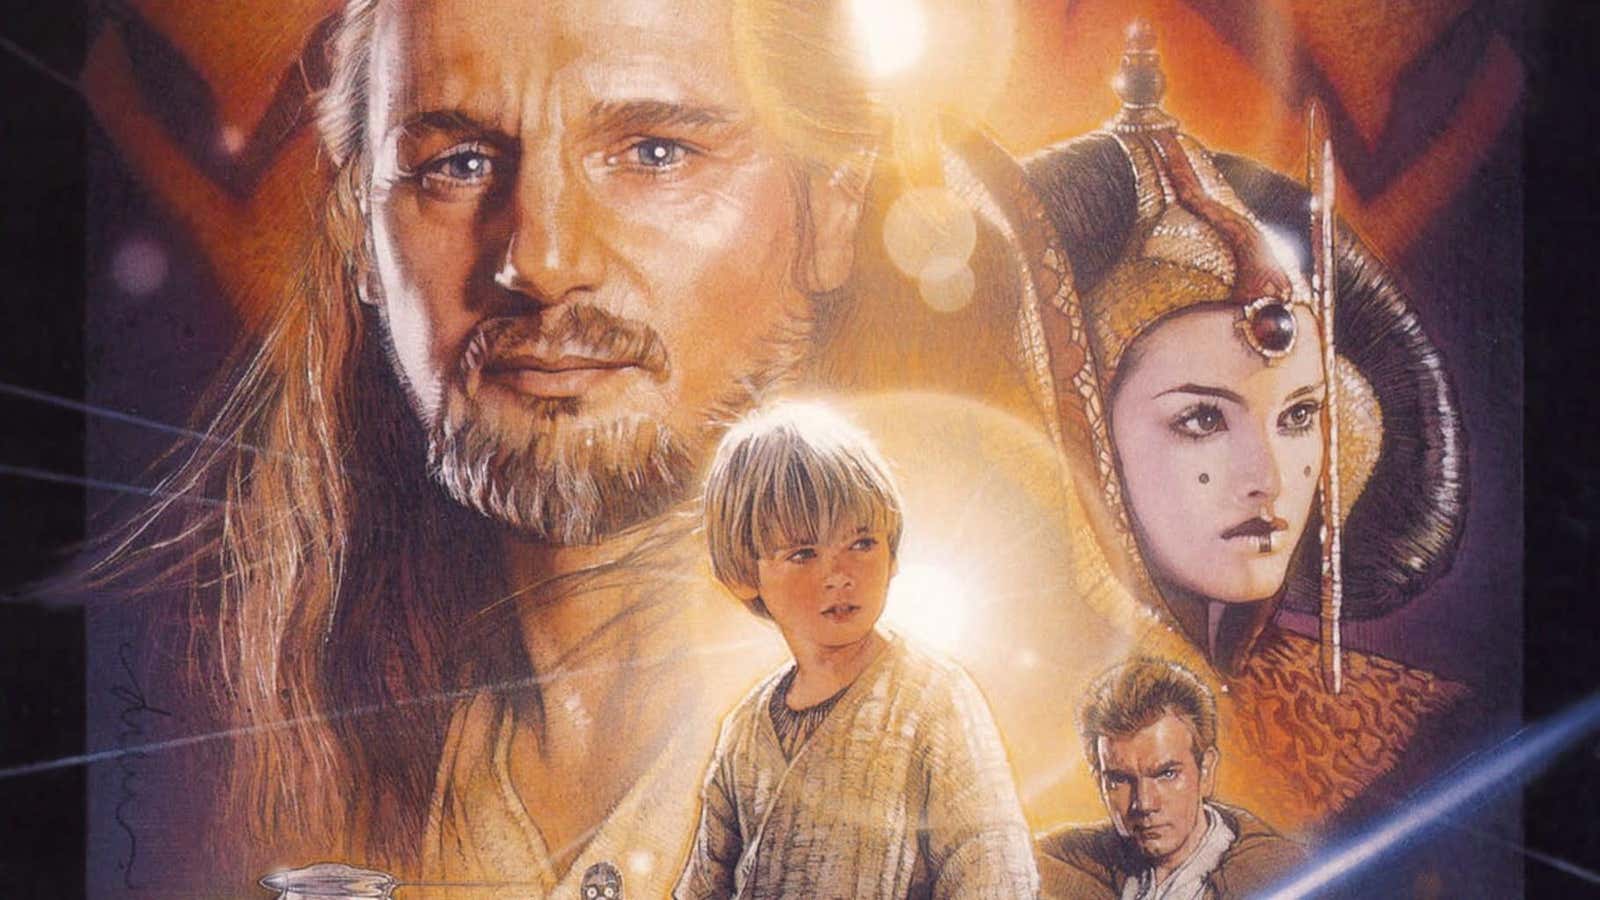 Star Wars: Episode I - The Phantom Menace Movie Review for Parents